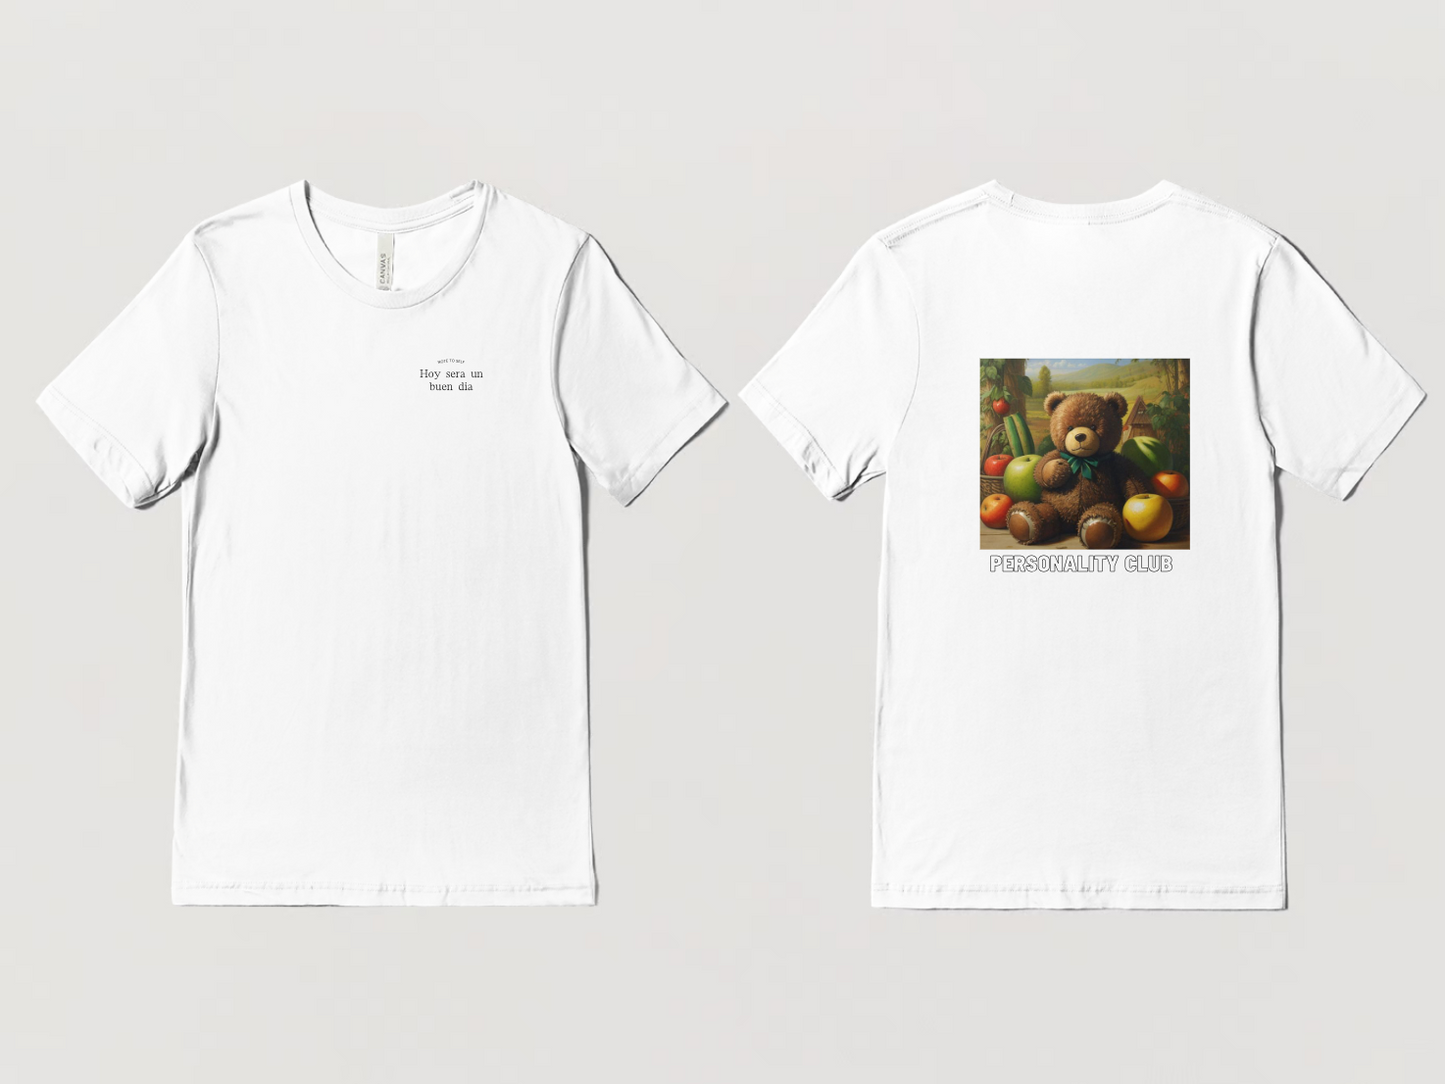 "Good Day" Personality Club Tee